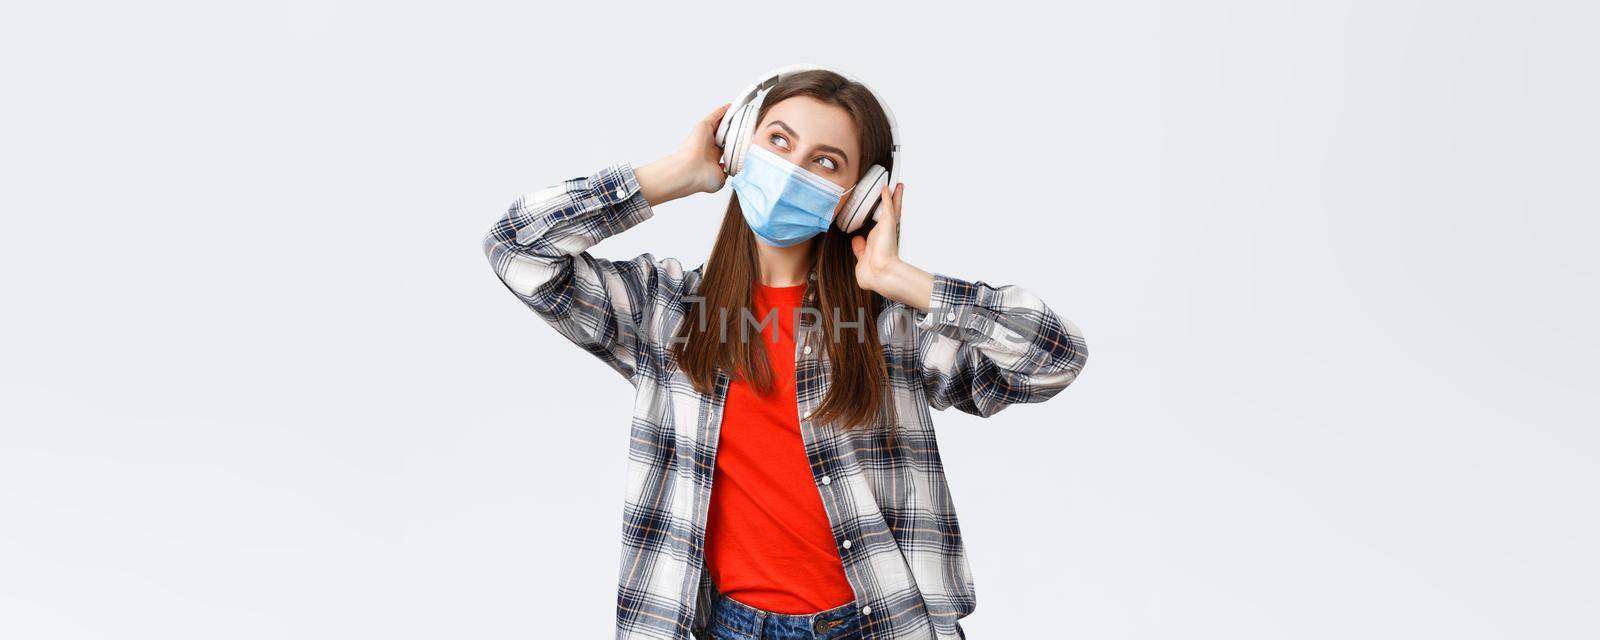 Social distancing, leisure and lifestyle on covid-19 outbreak, coronavirus concept. Happy carefree attractive girl in medical mask, look away dreamy, imaging while listening music in headphones.